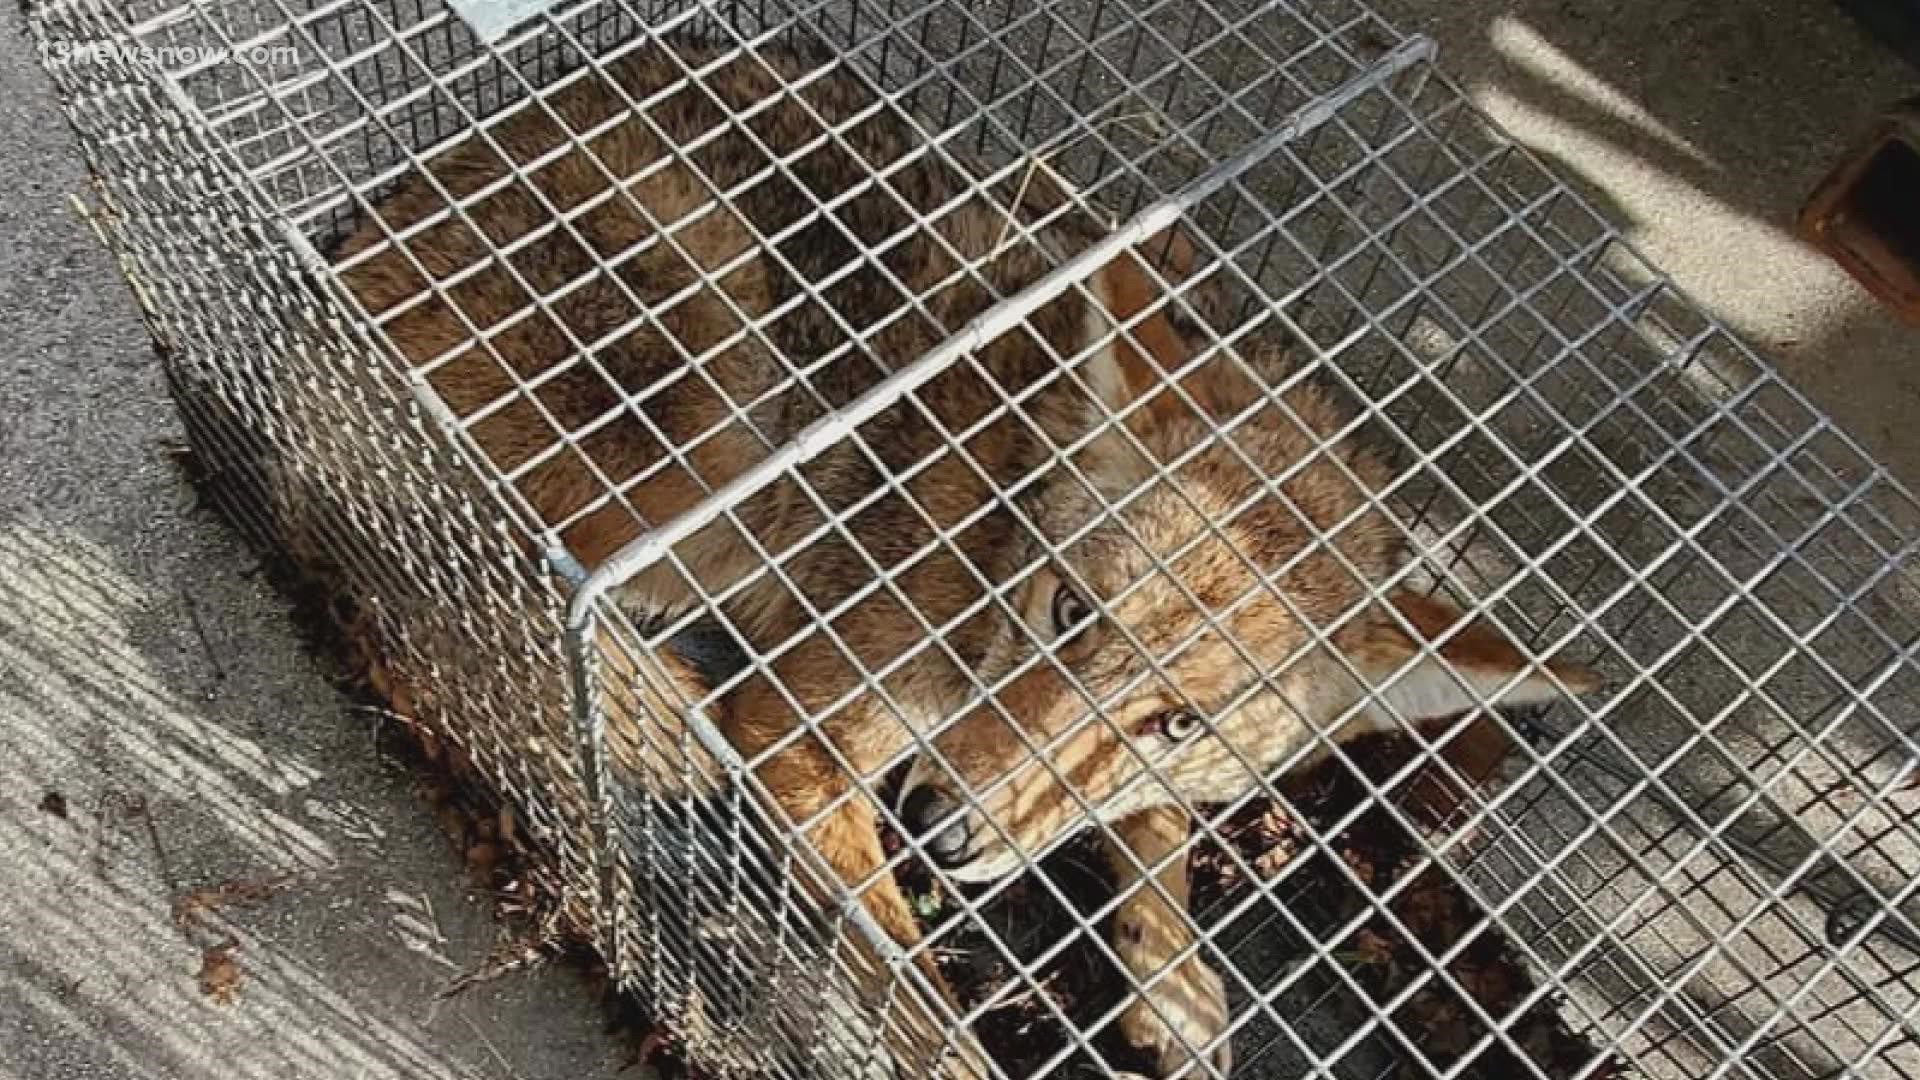 More and more people are reporting coyote sightings in unusual areas of Hampton Roads.